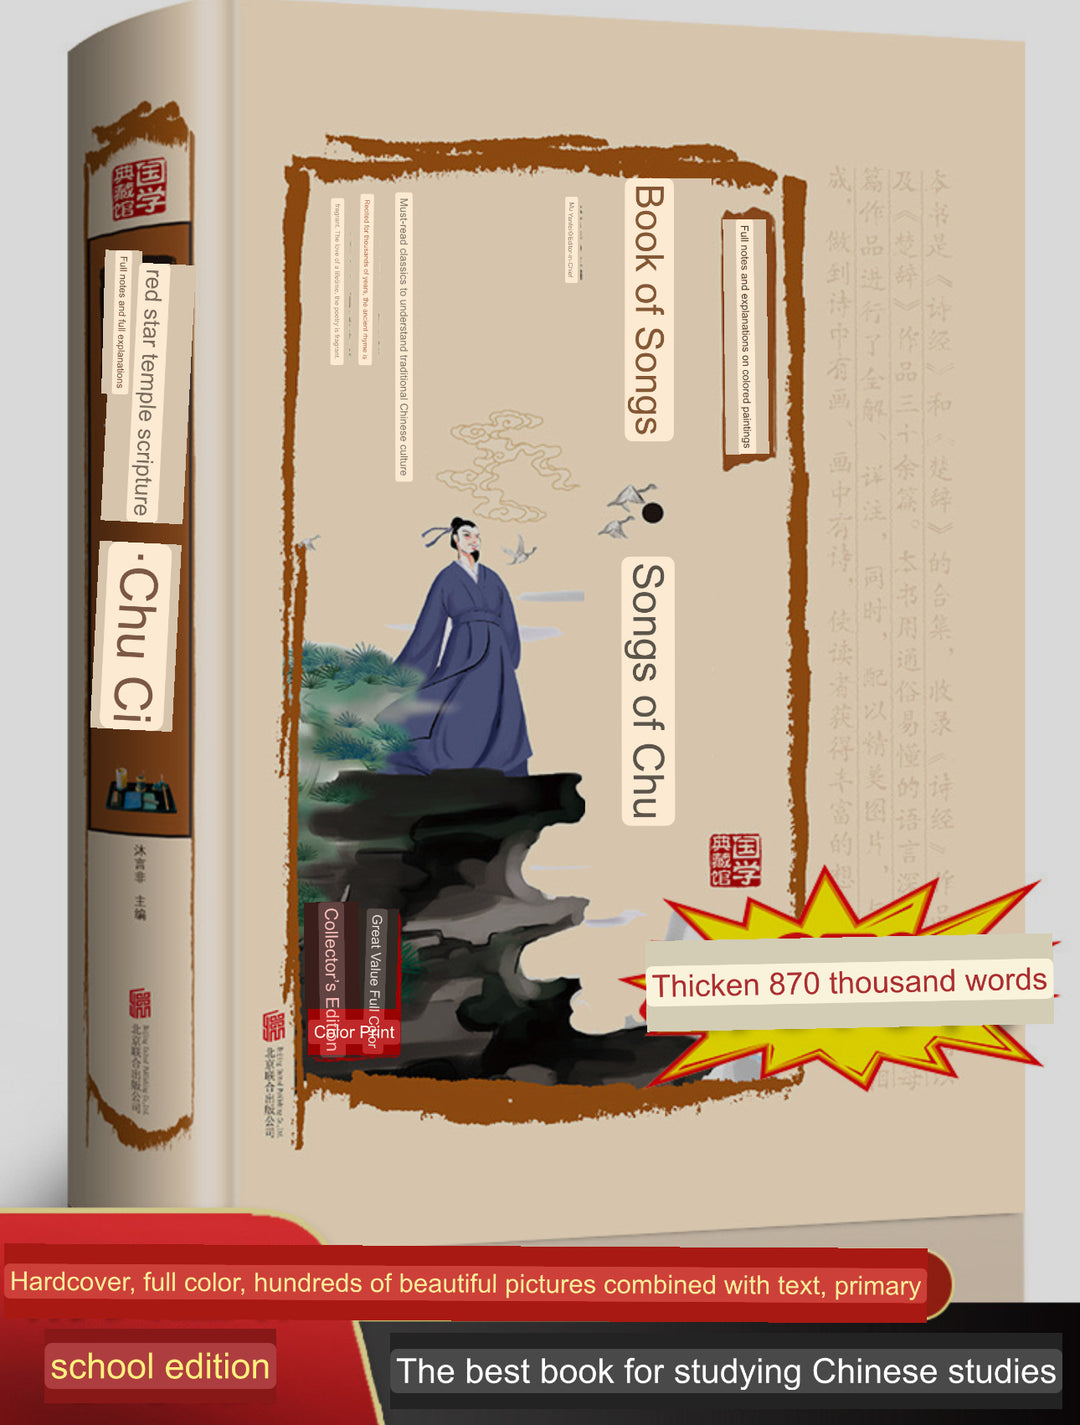 I Ching Book of Change • Original Chinese Classics • High Quality Hardcover • Full Colour Illustrations